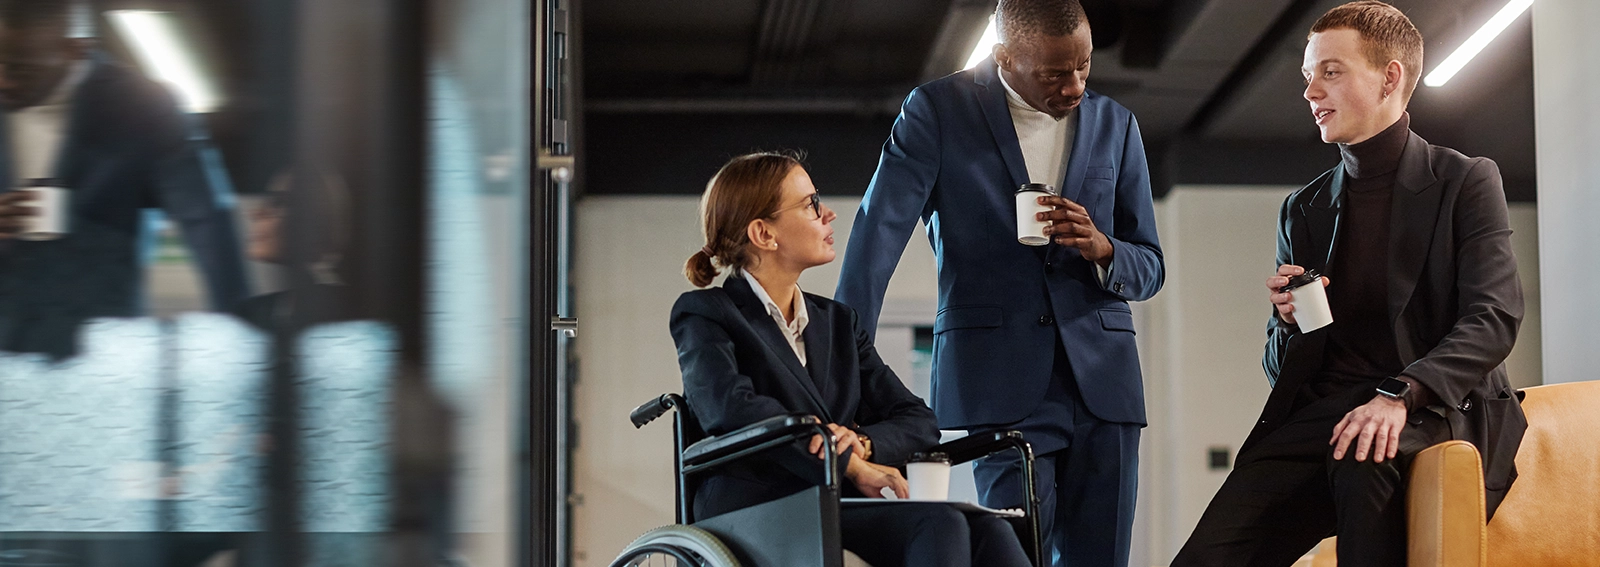 Two workers, one in a wheelchair, talking together in an office.